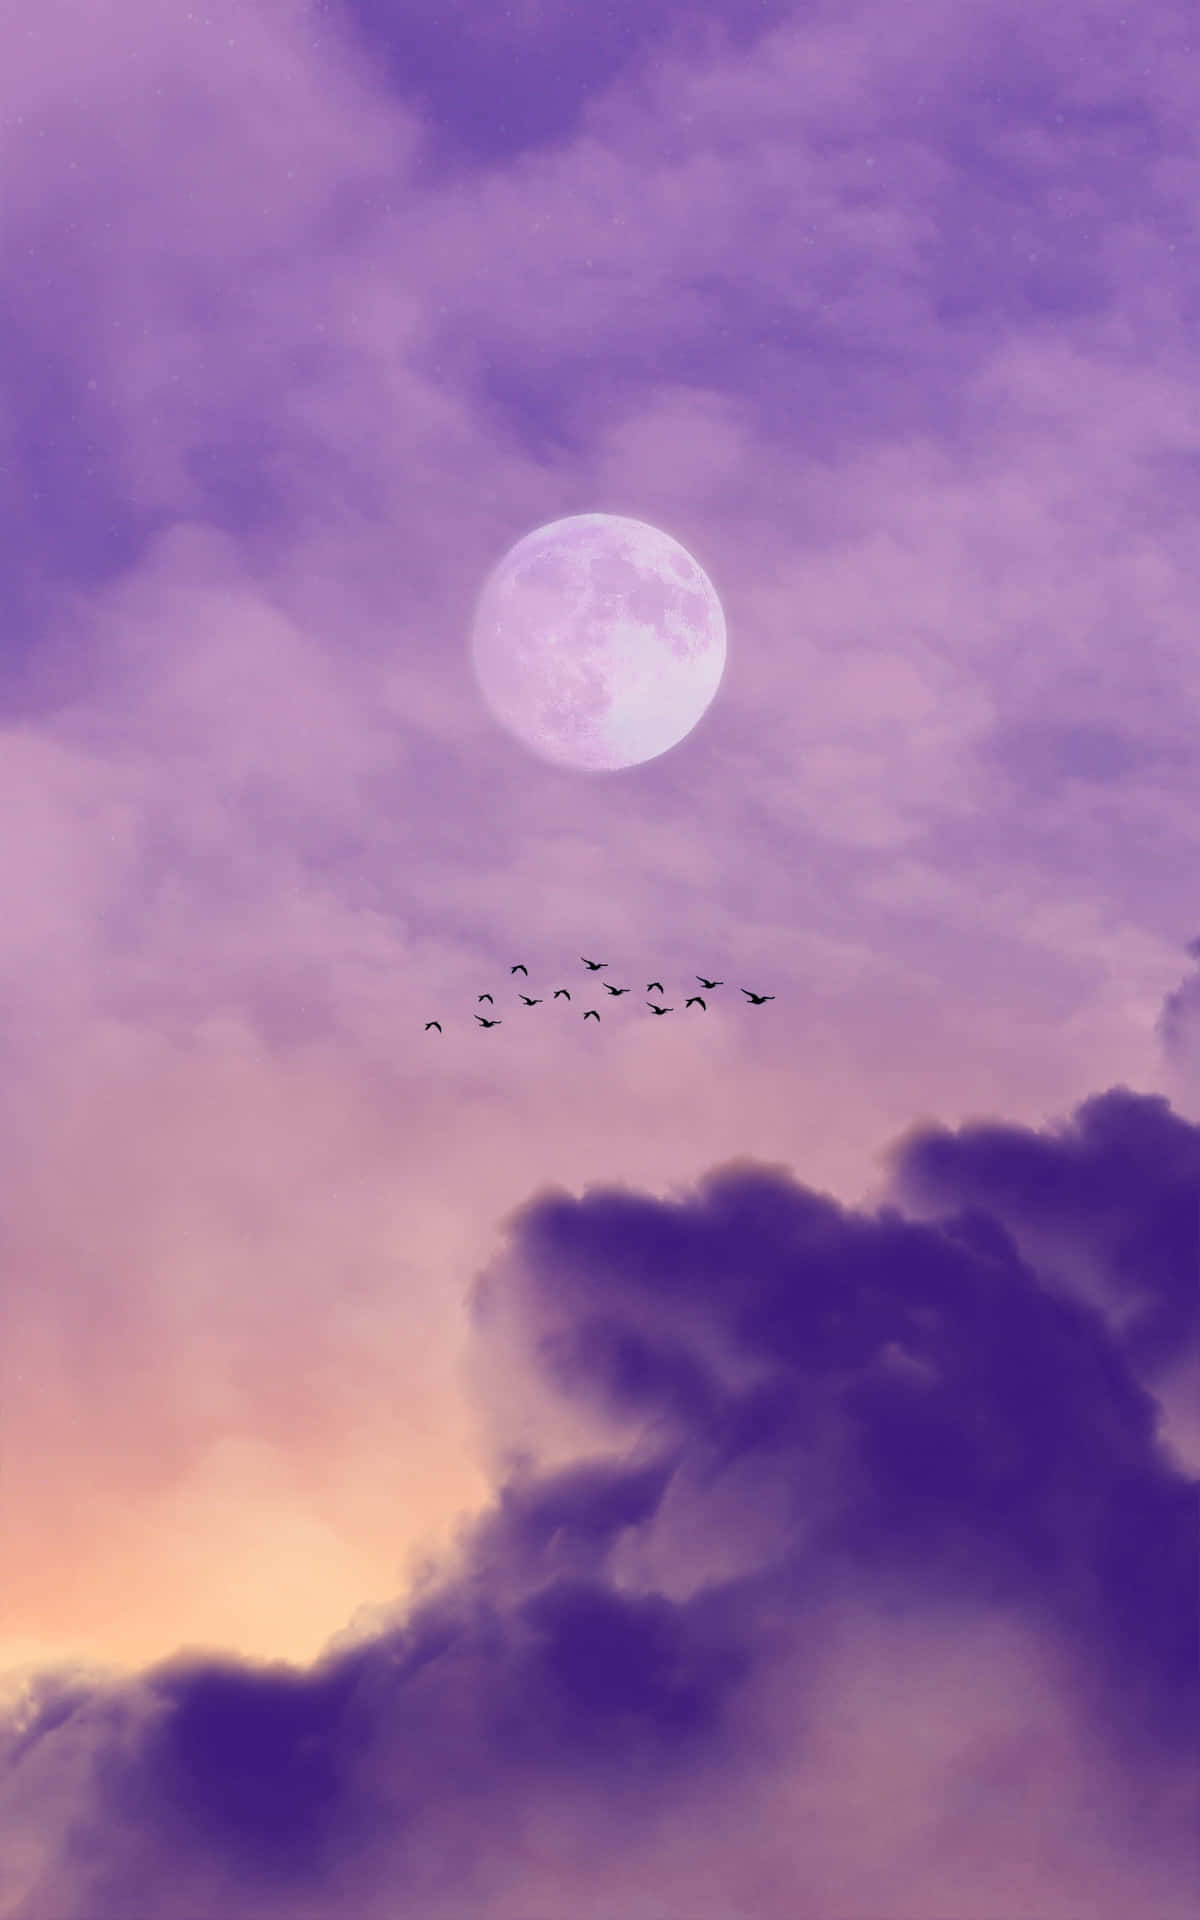 Pink Moon Cloudy Sky And Birds Wallpaper